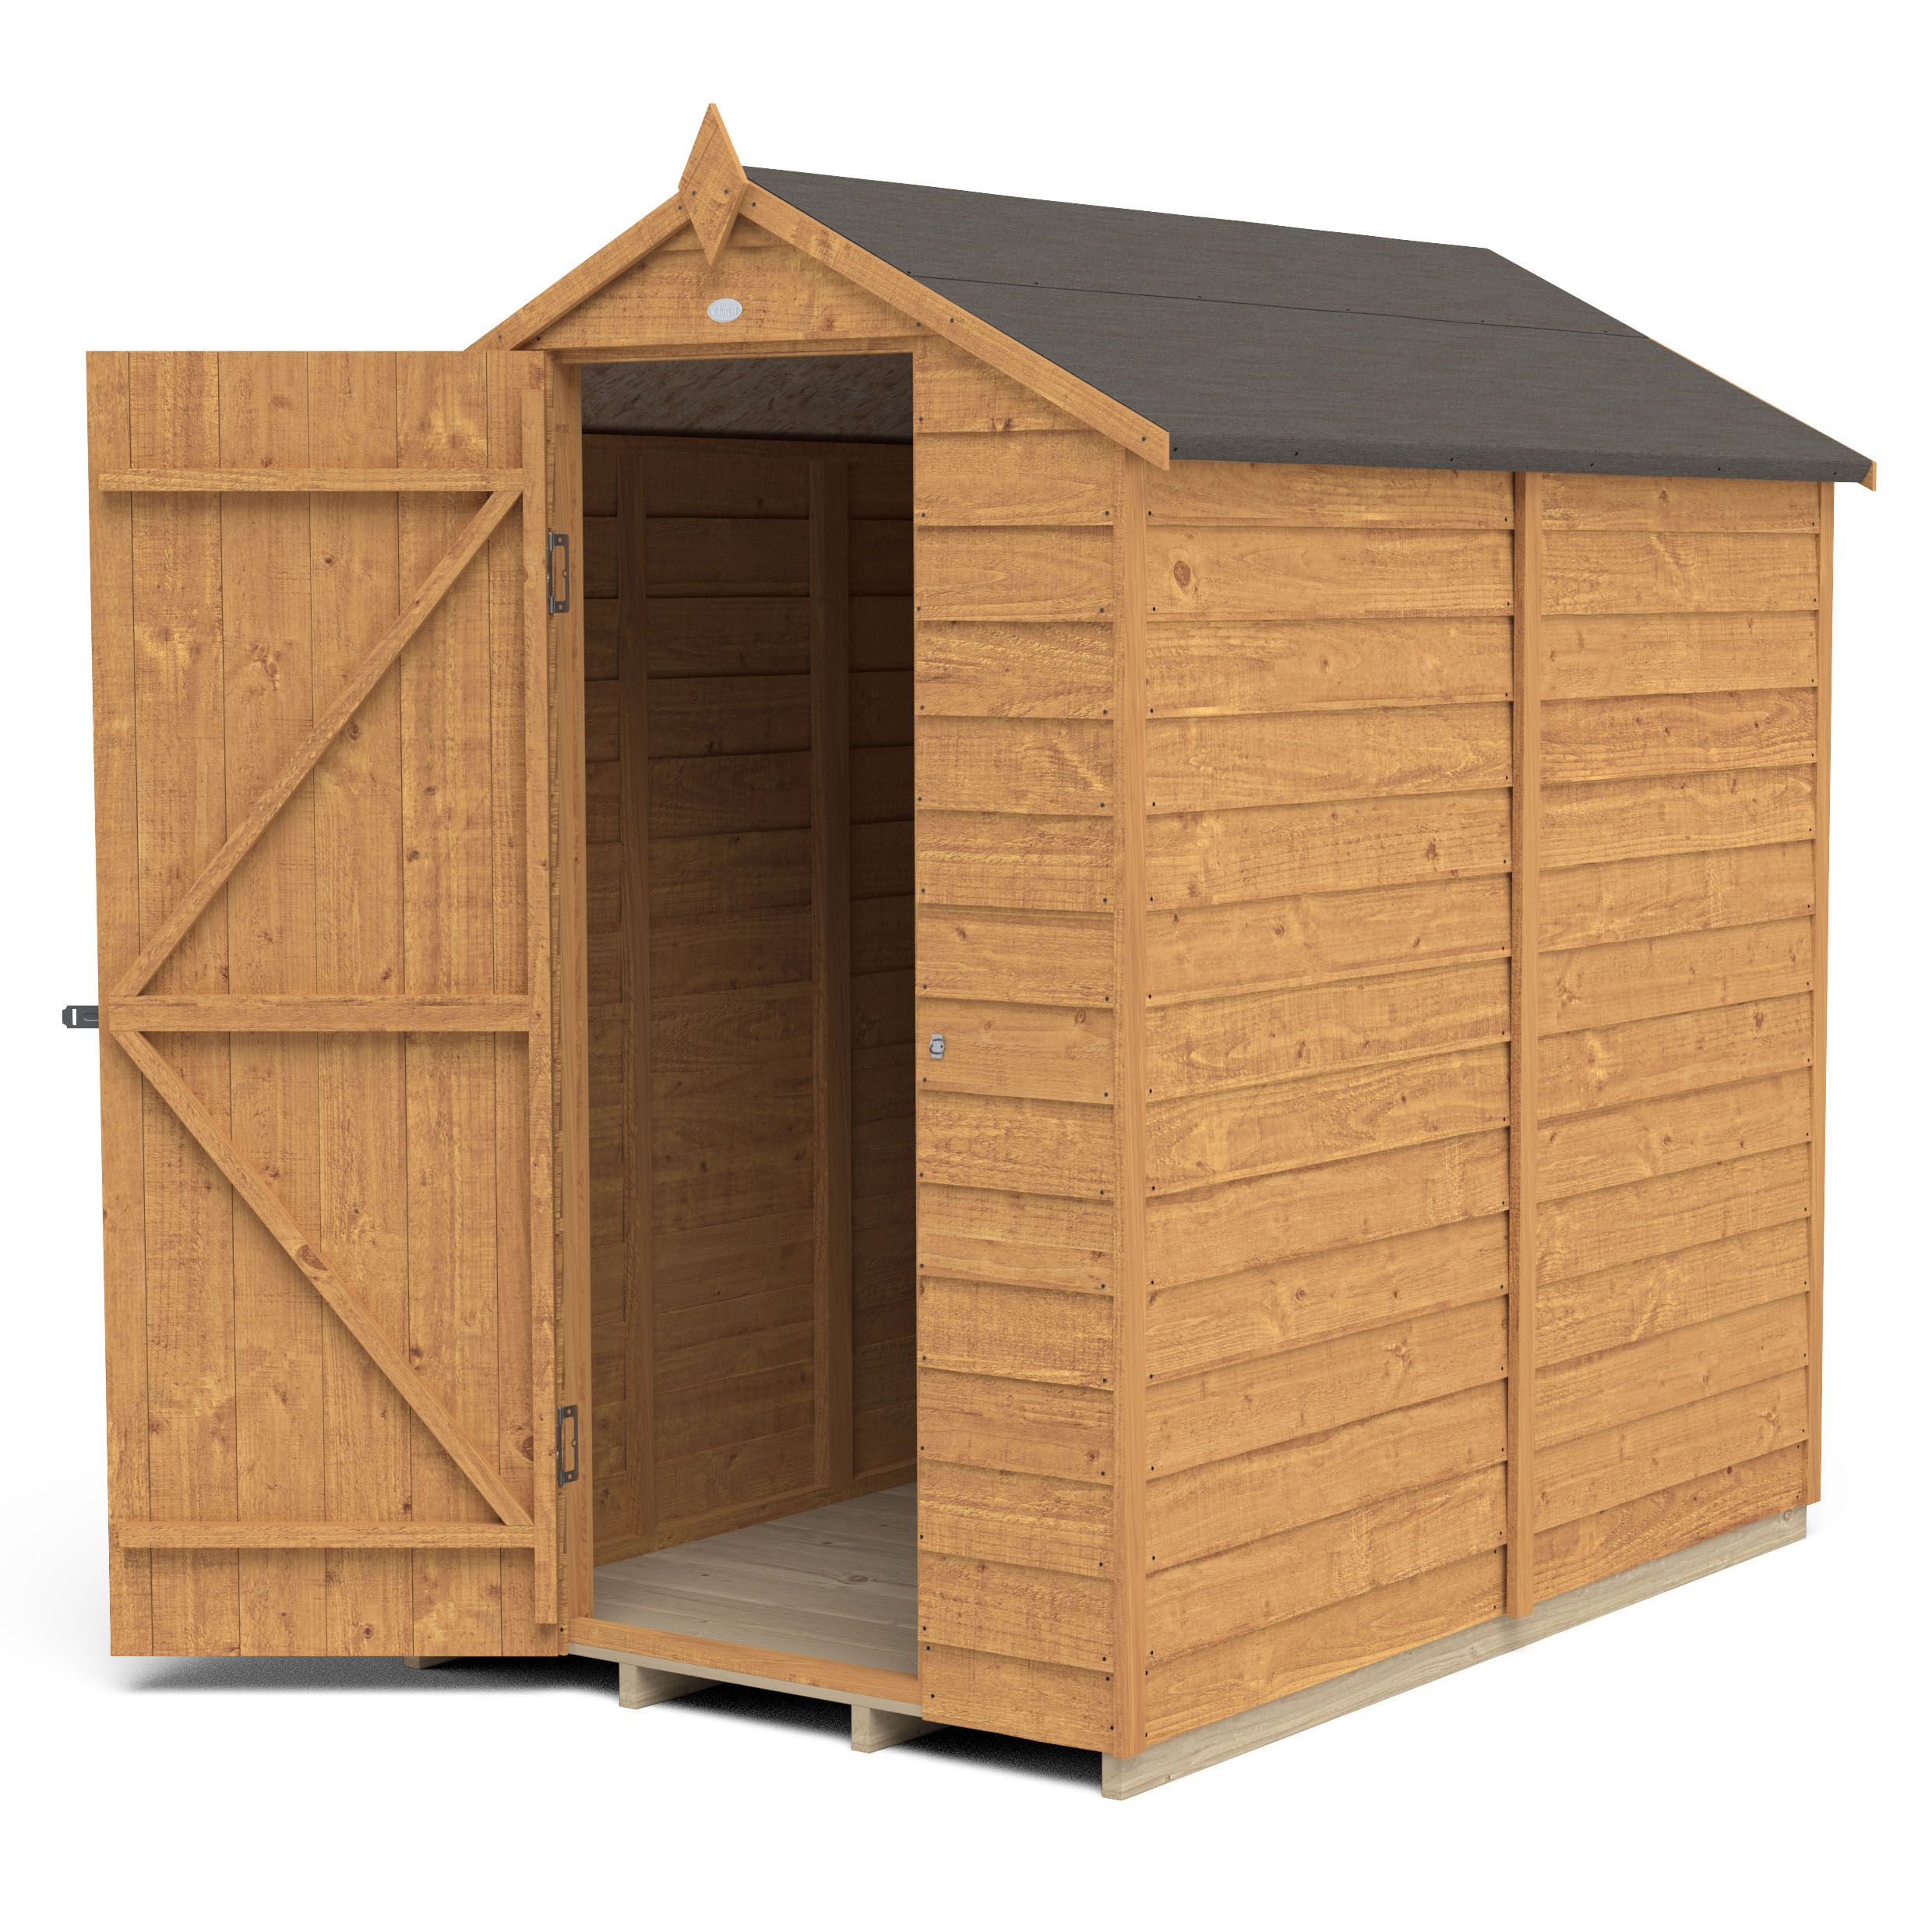 Forest Garden Overlap 6x4 ft Apex Wooden Dip treated Shed with floor (Base included)